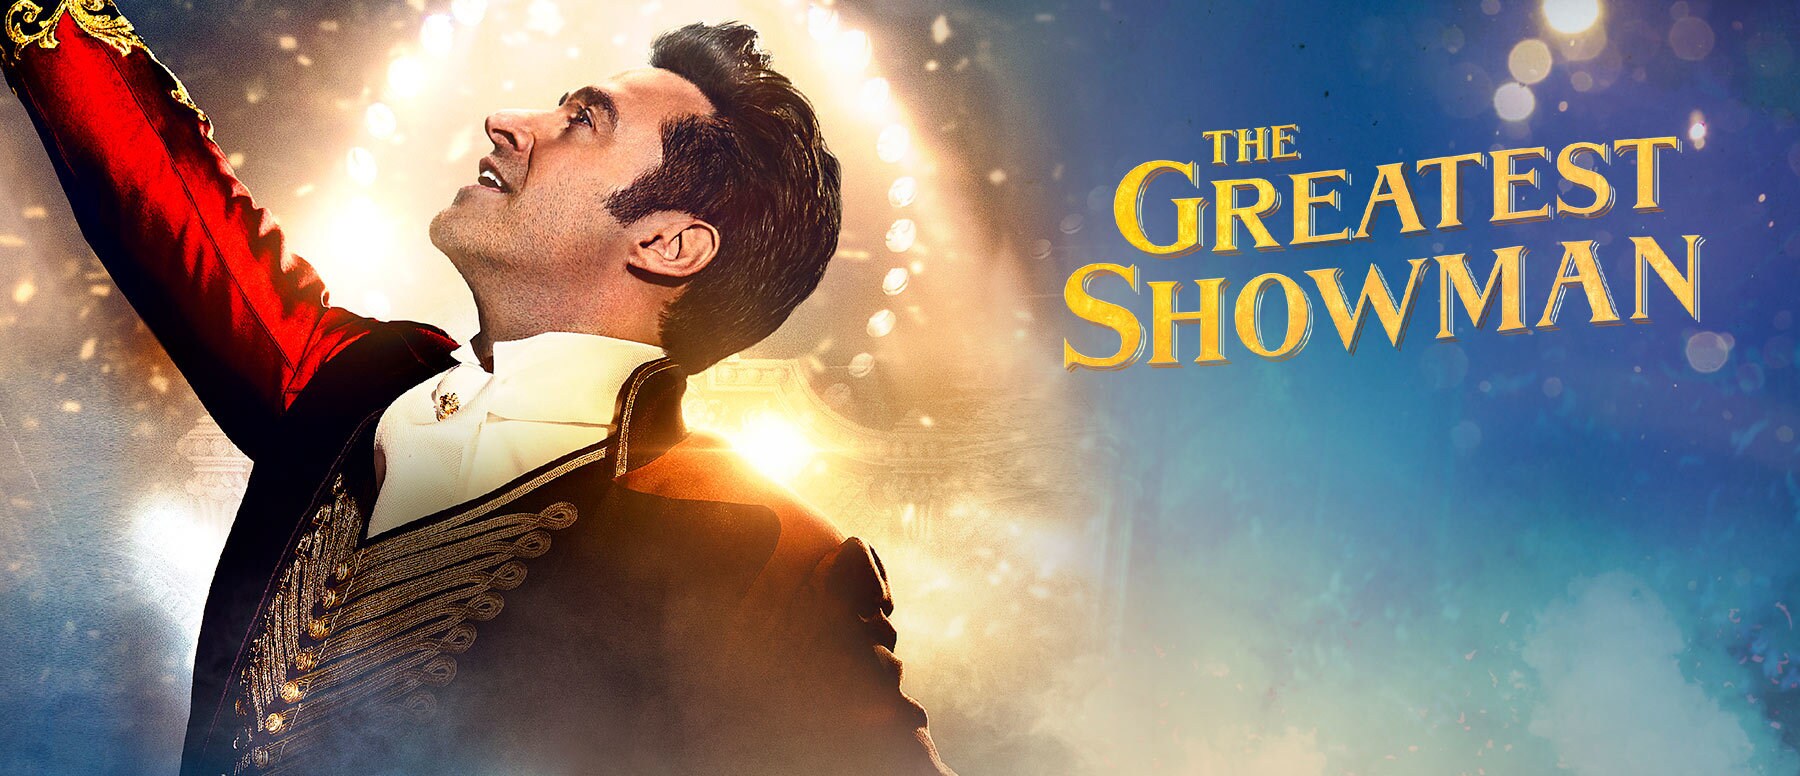 Watch The Greatest Showman